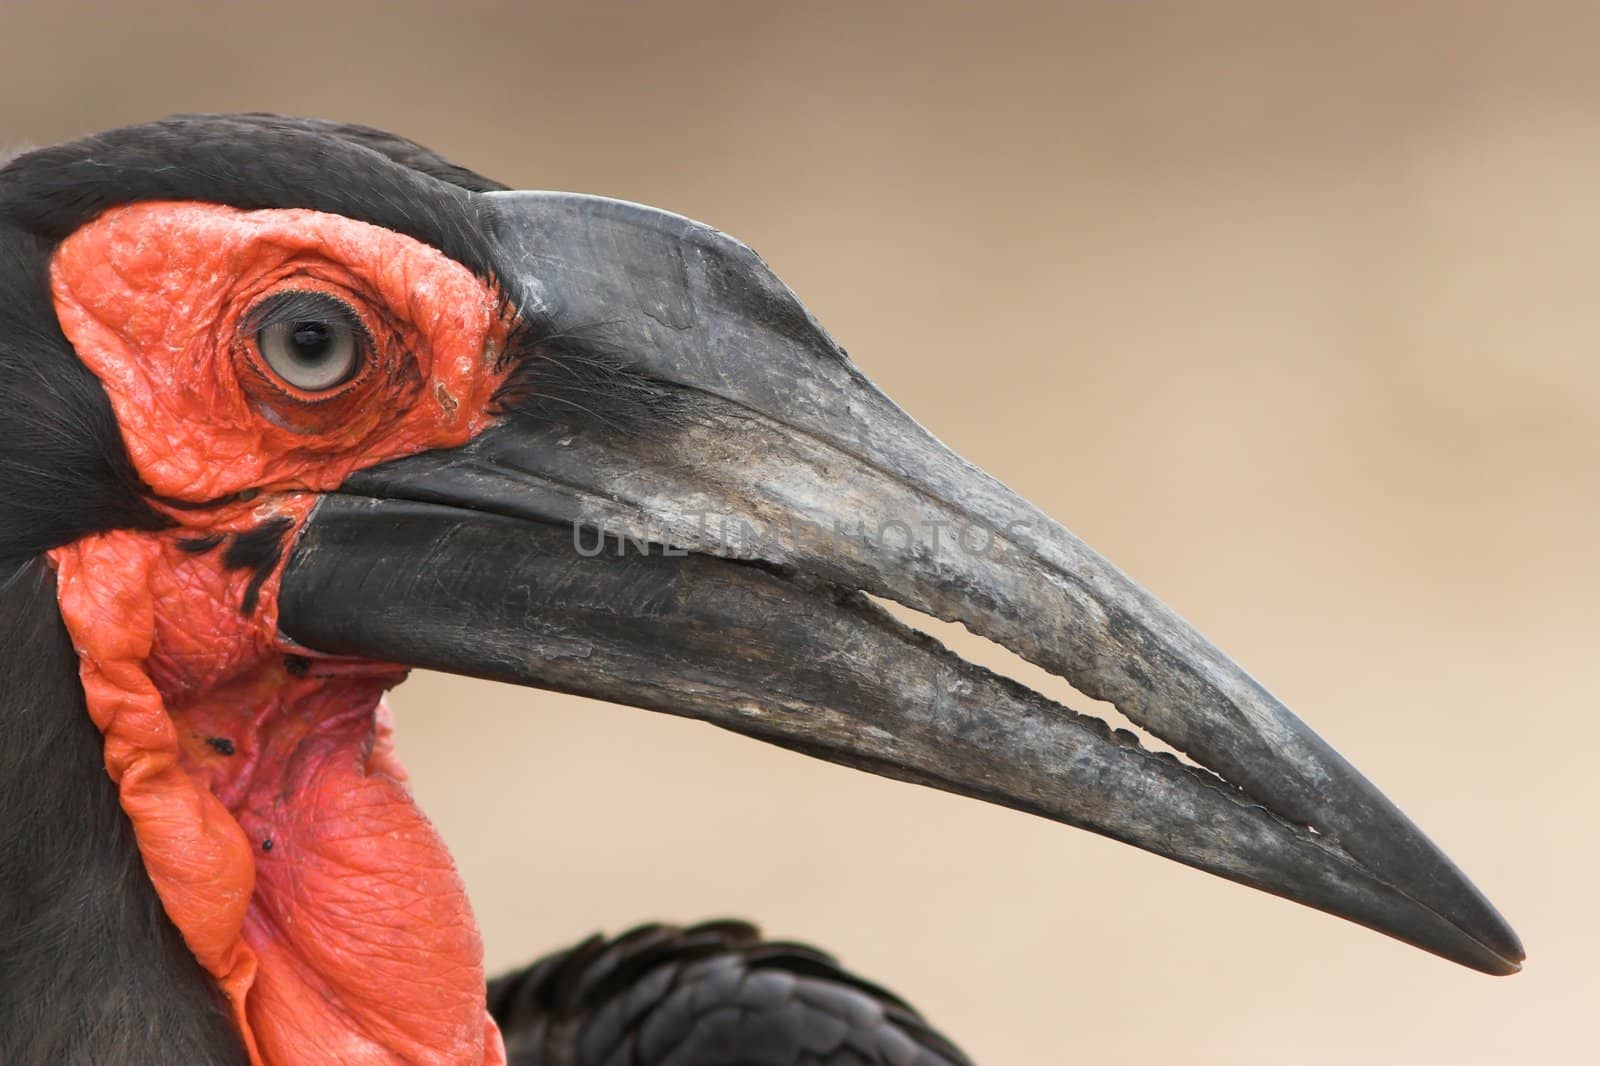 Close up of the southern Ground Hornbill